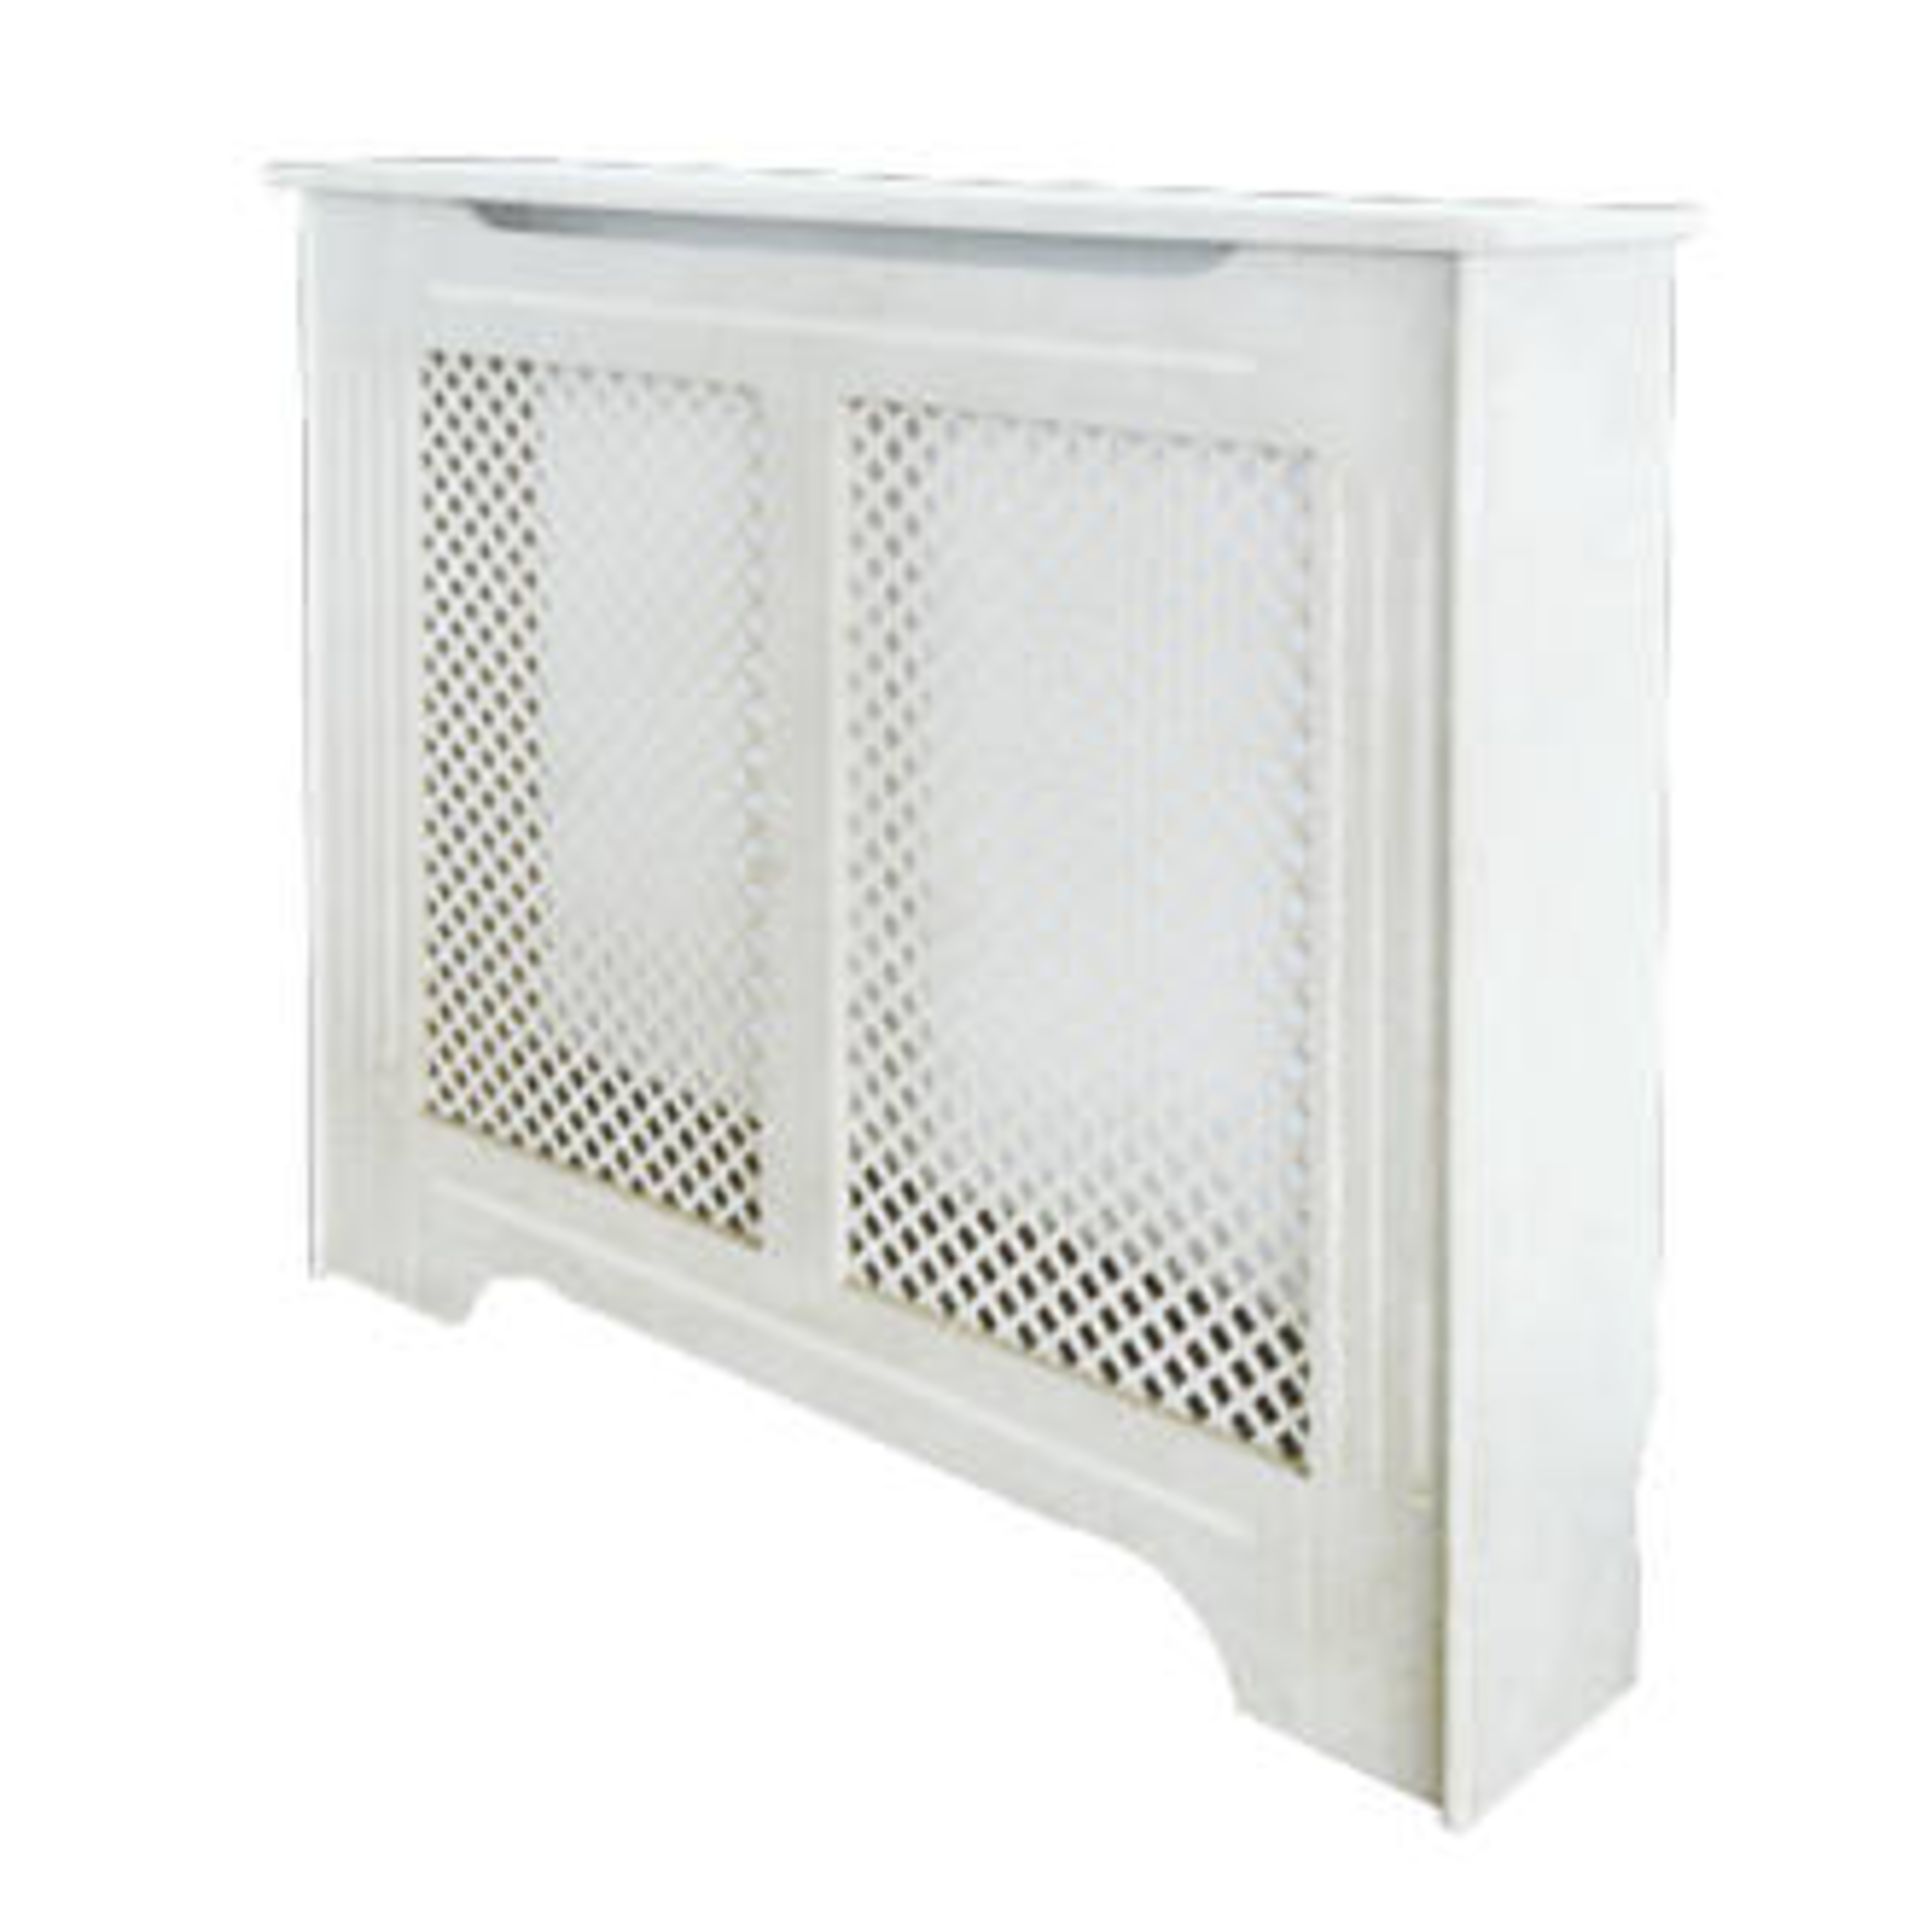 (LL84) 1020 X 210 X 868MM VICTORIAN RADIATOR CABINET WHITE. White finish. Provides a practical